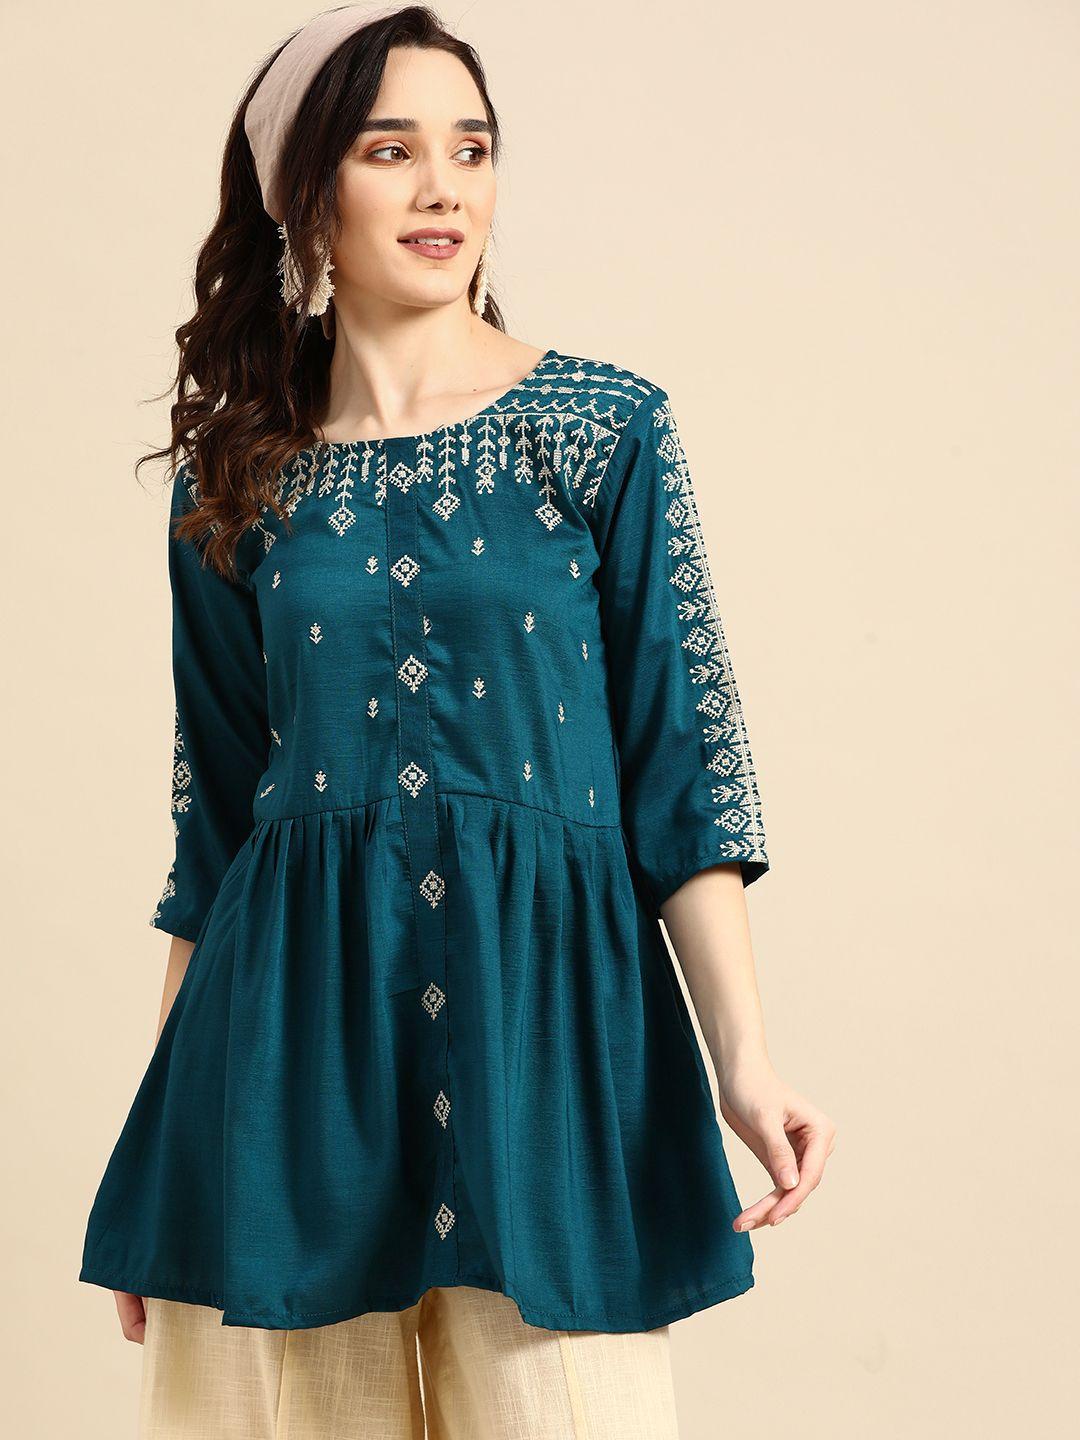 sangria teal embroidered cinched waist longline top